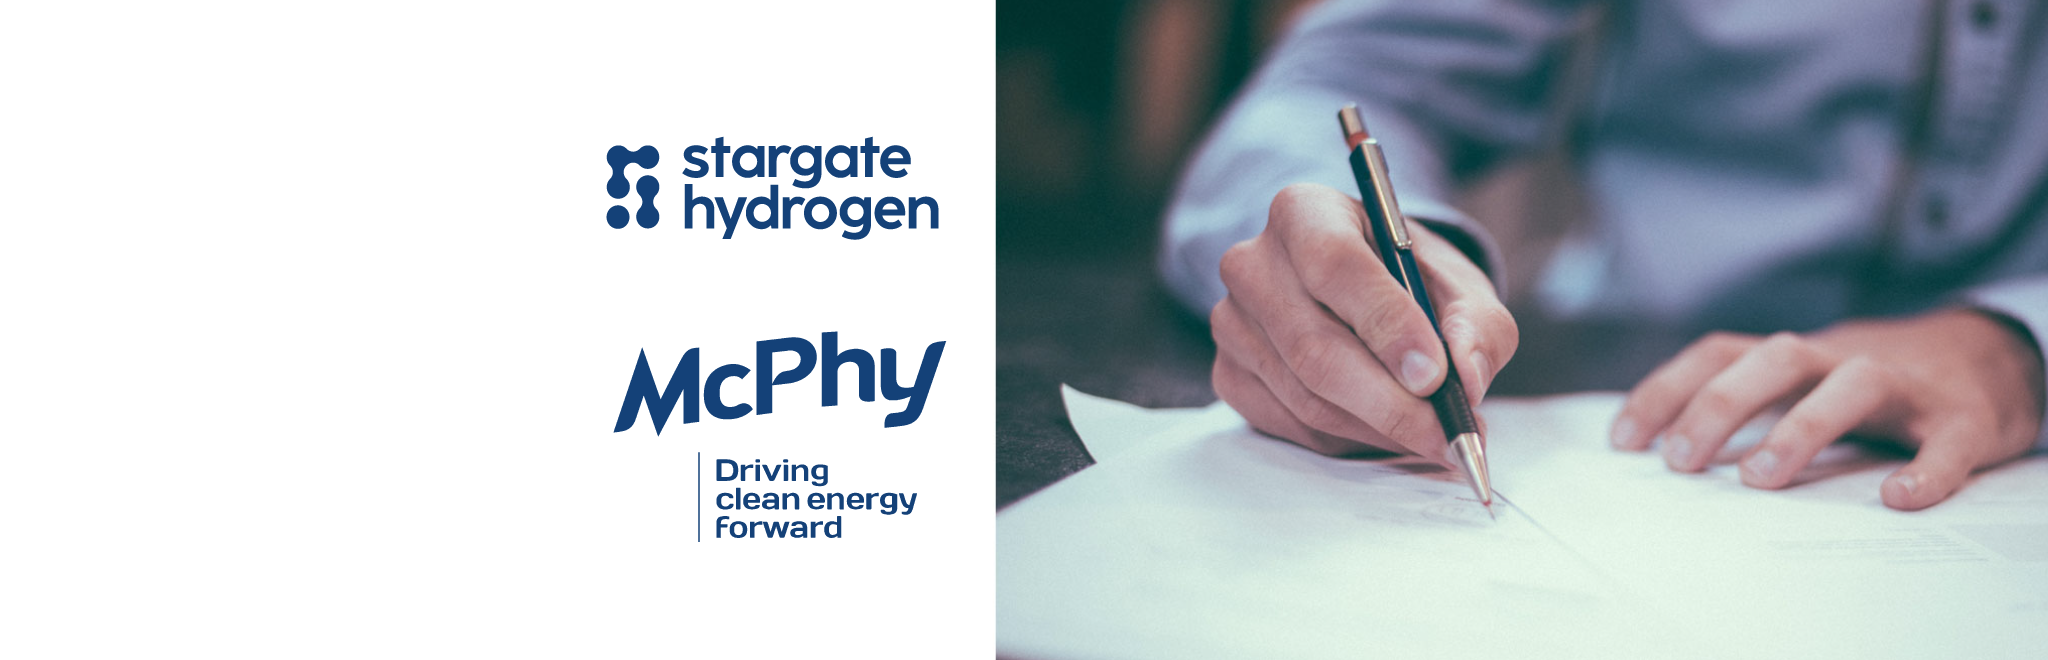 McPhy and Stargate Hydrogen announce cooperation in electrodes for next generation alkaline electrolysers